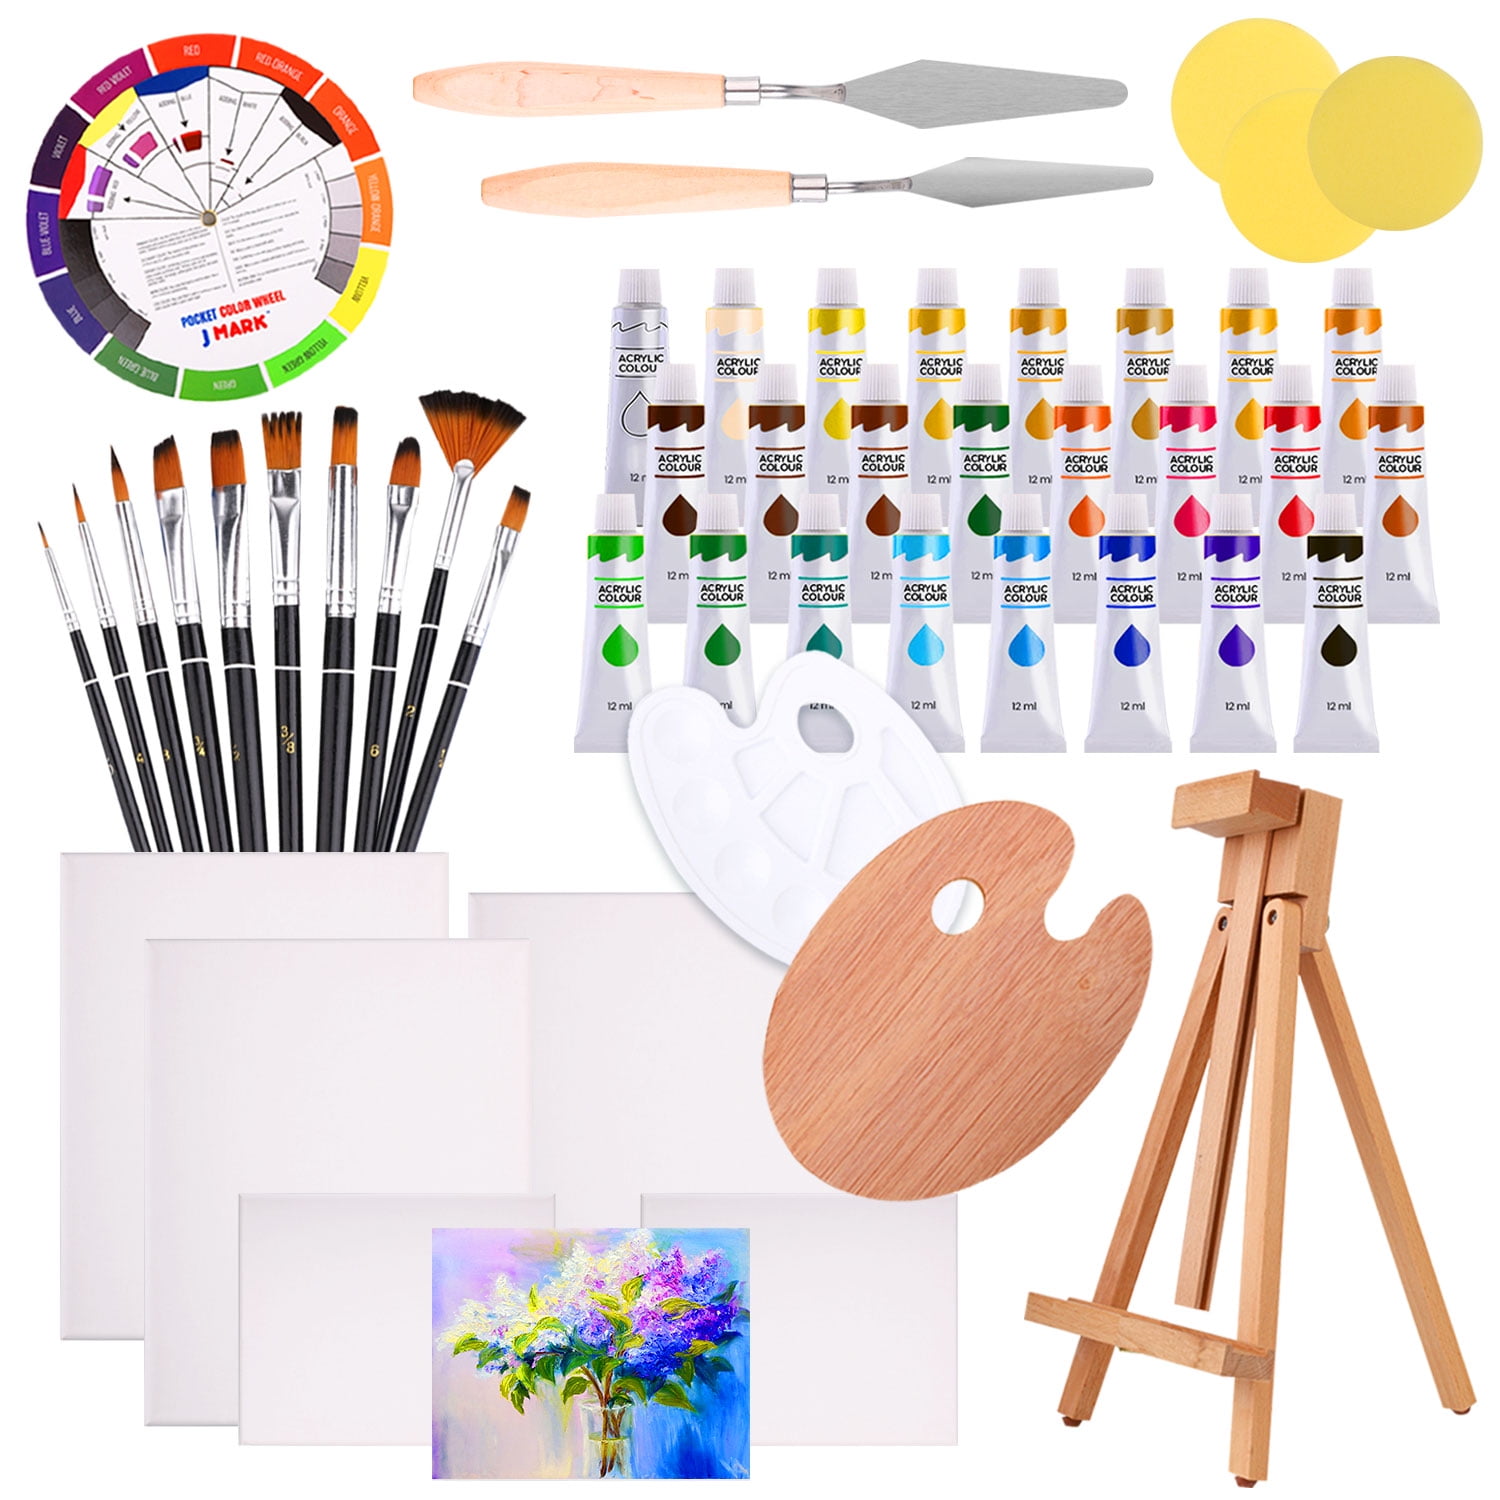 ESRICH Acrylic Paint Canvas Set,52 Piece Professional Painting Supplies Kit  with 2 Wood Easel,2 * 12Colors,2 * 10 Brushes,Circular Canvas Etc,Premium